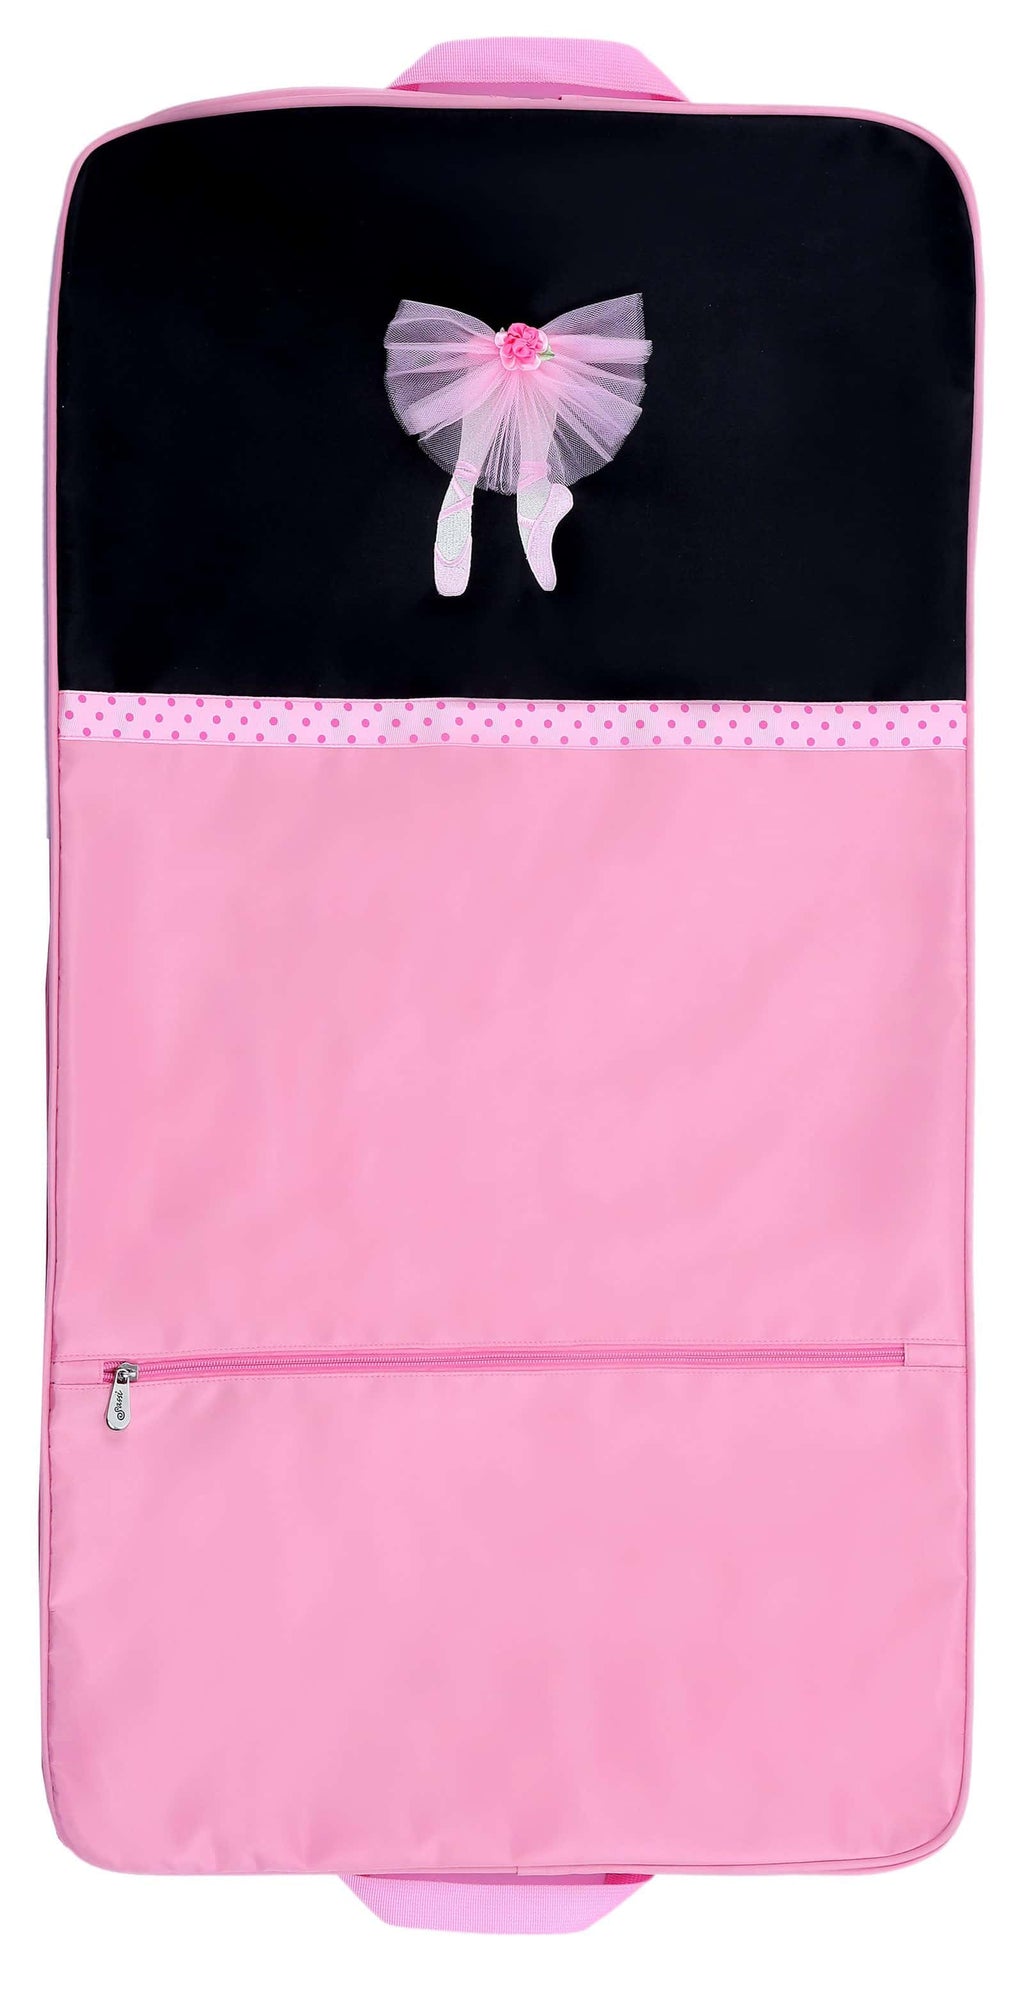 OYT-04 On Your Toes Garment Bag